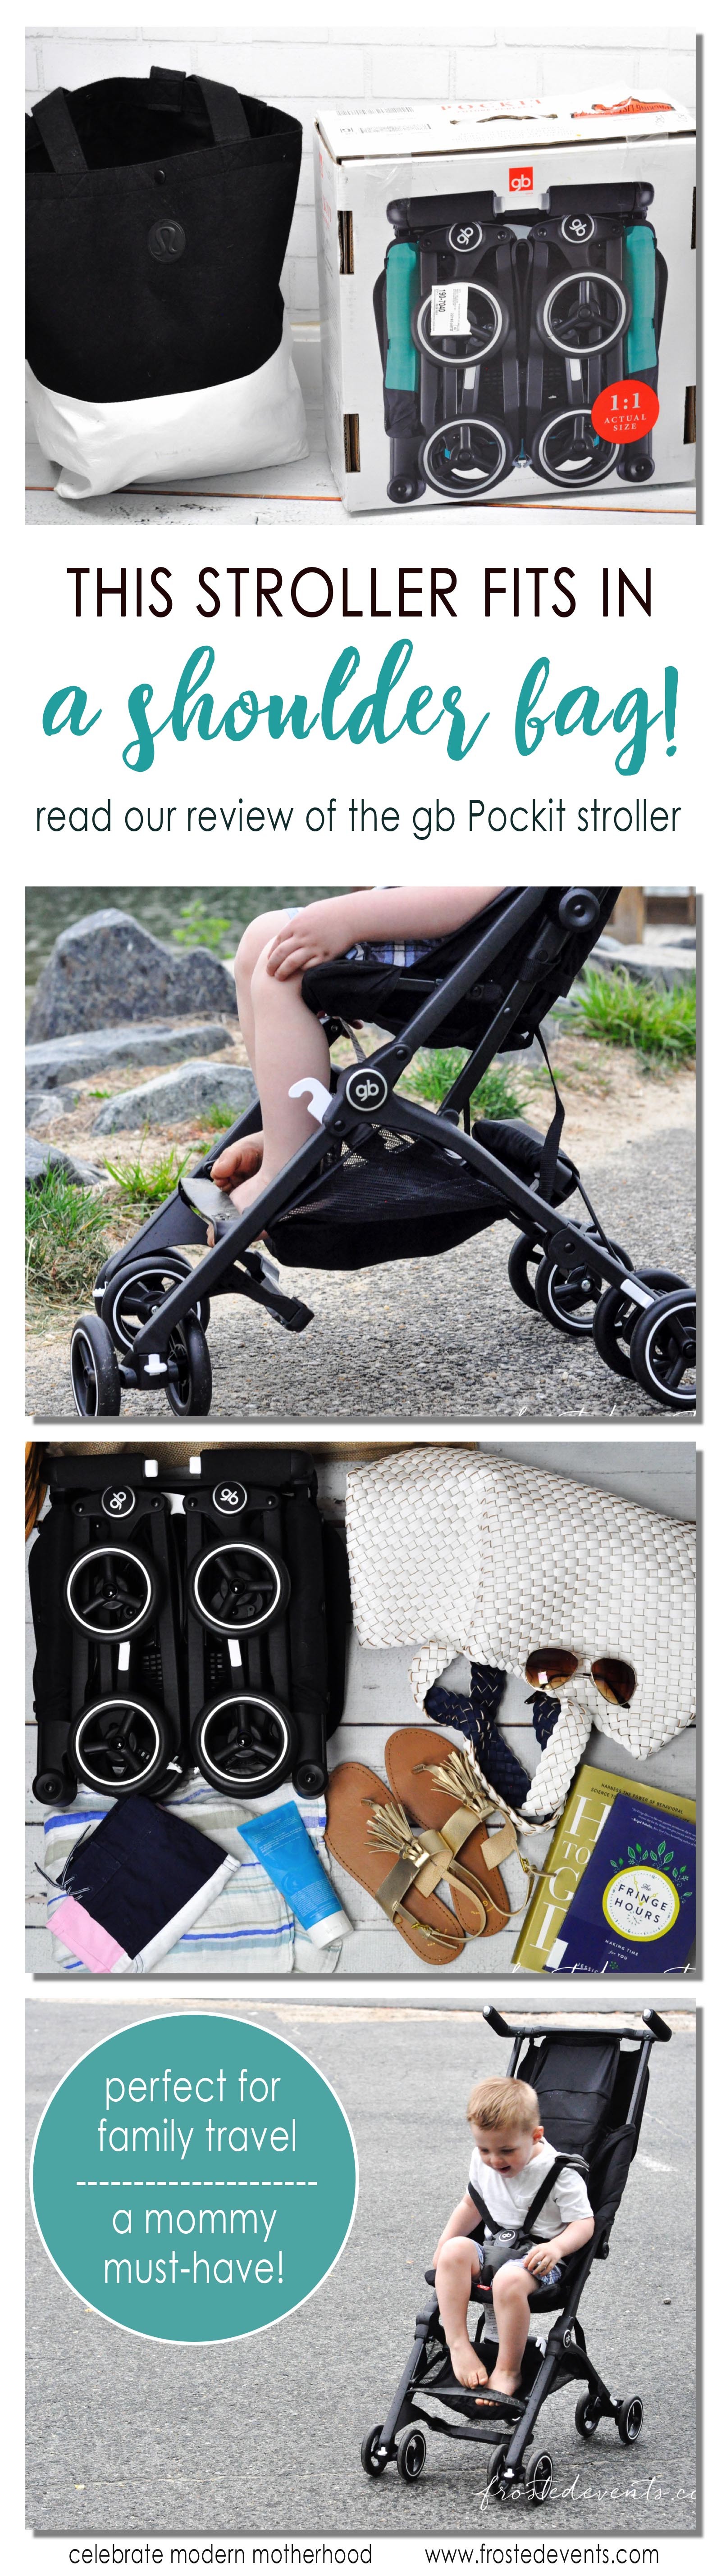 gb Pockit Stroller Fits in a Shoulder Bag Perfect for Family Travel